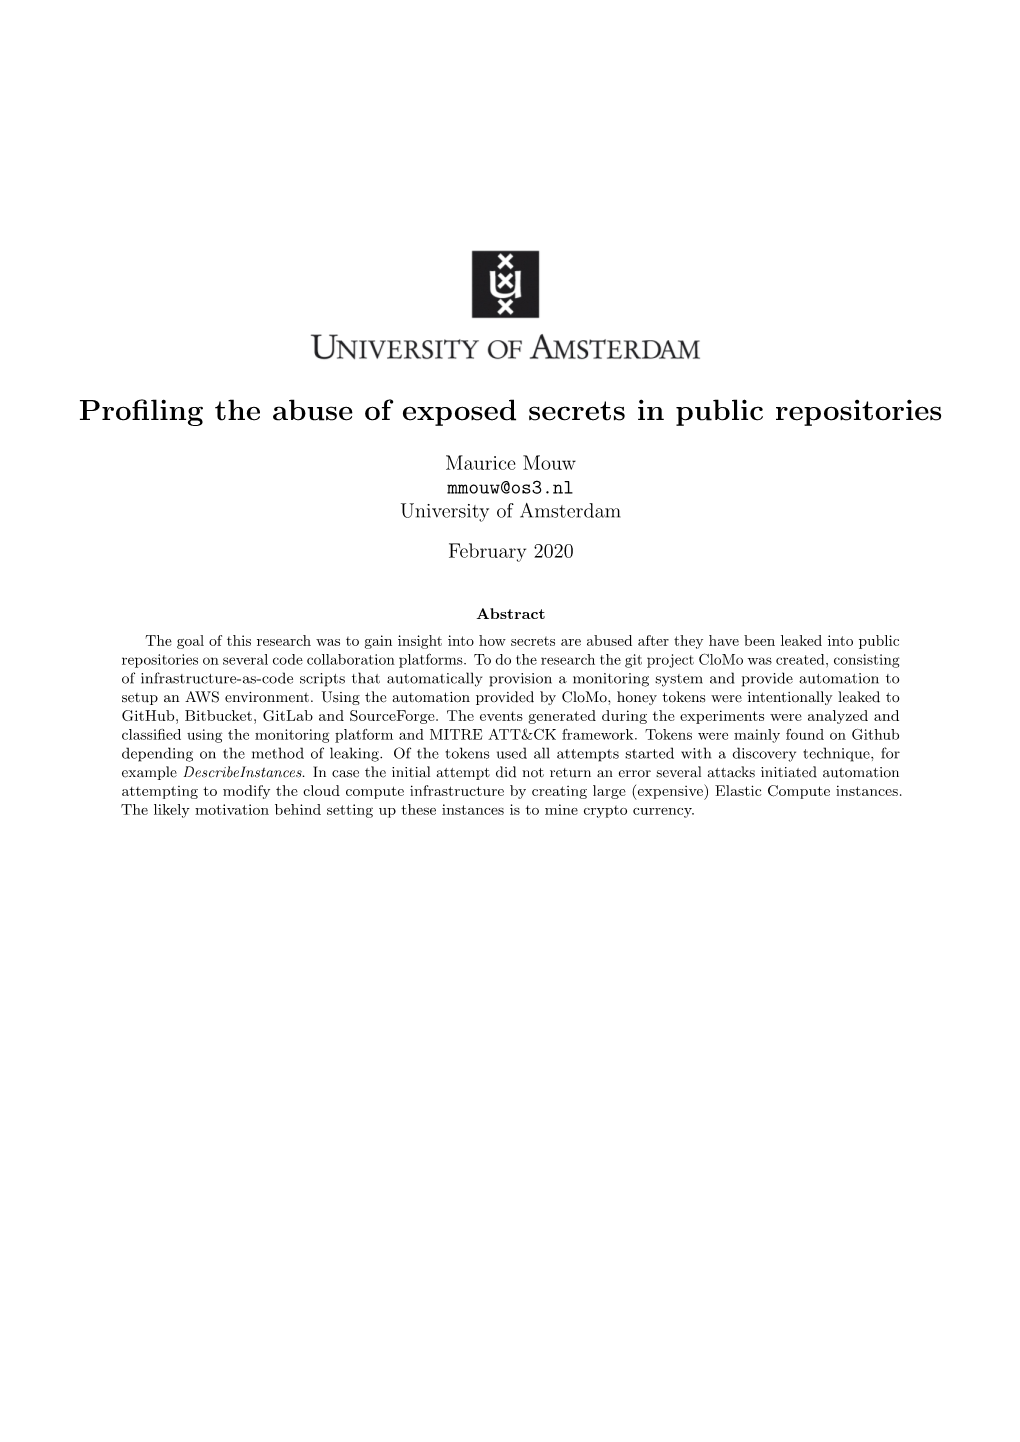 Profiling the Abuse of Exposed Secrets in Public Repositories